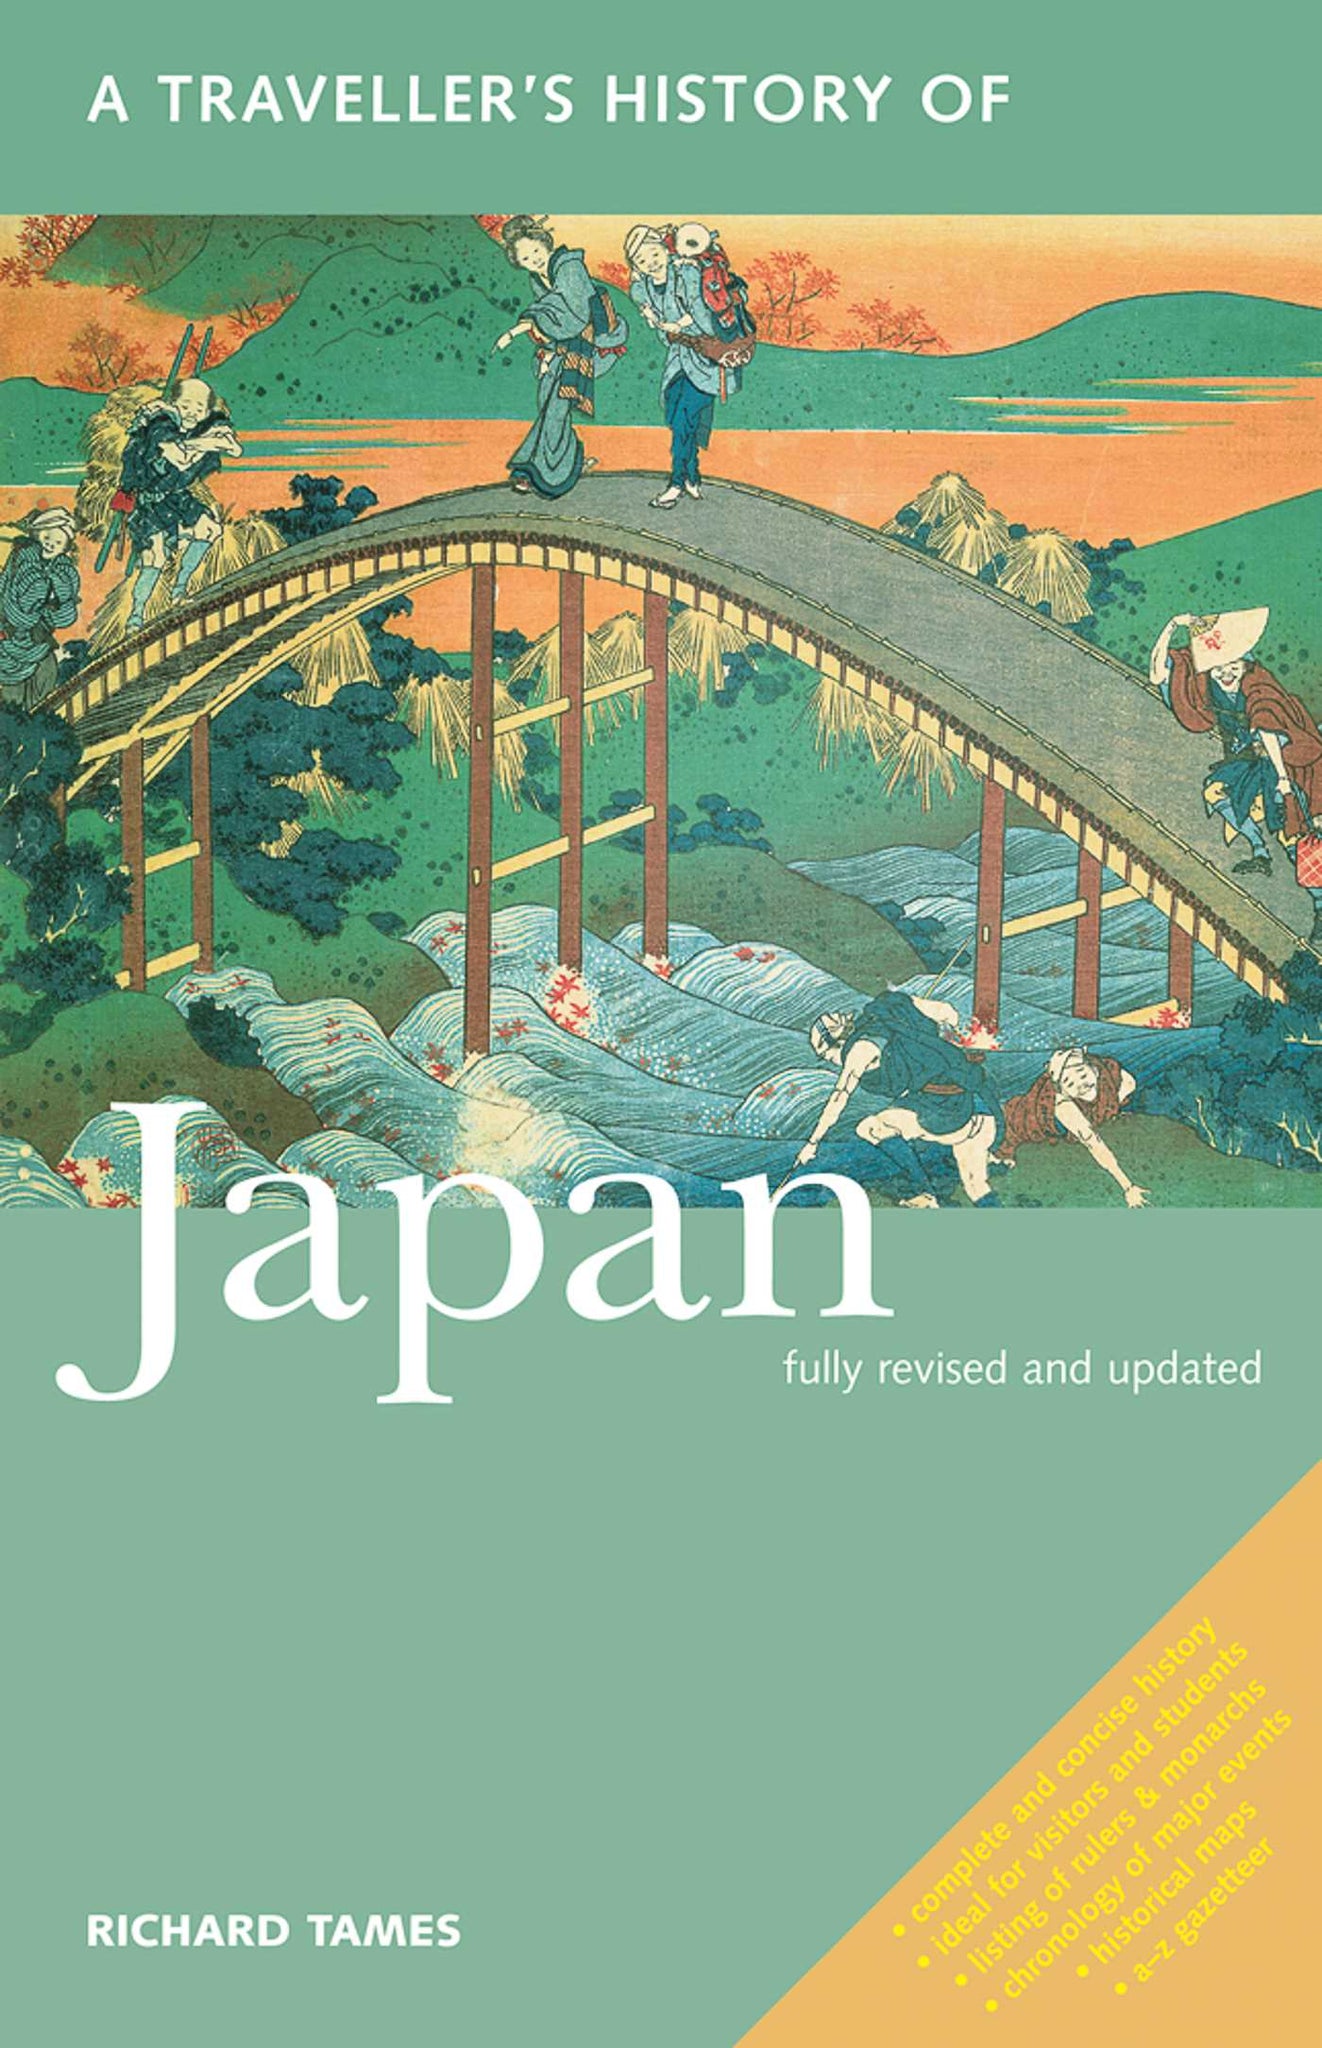 A Traveller's History of Japan